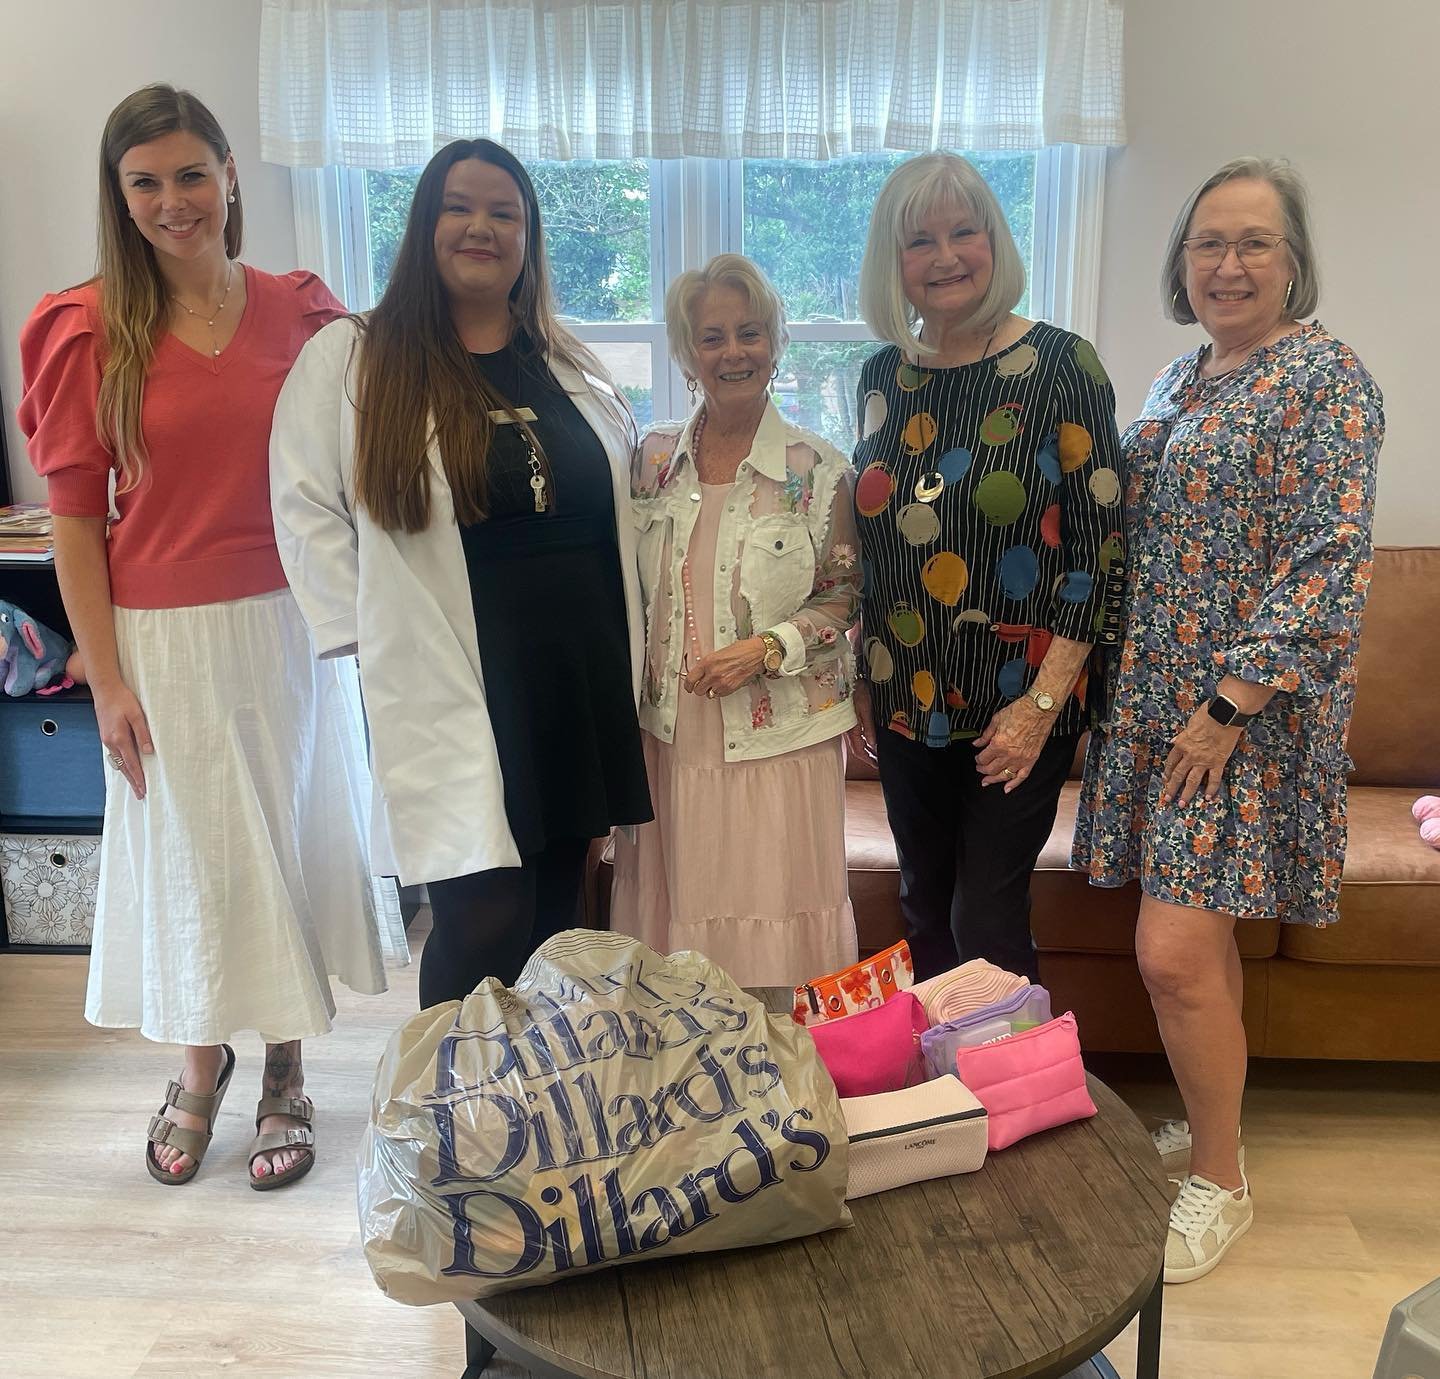 THANK YOU to the Anderson County Woman&rsquo;s Club and our local Dillard&rsquo;s for so thoughtfully making and donating cosmetic bags filled with a variety of items for our clients!